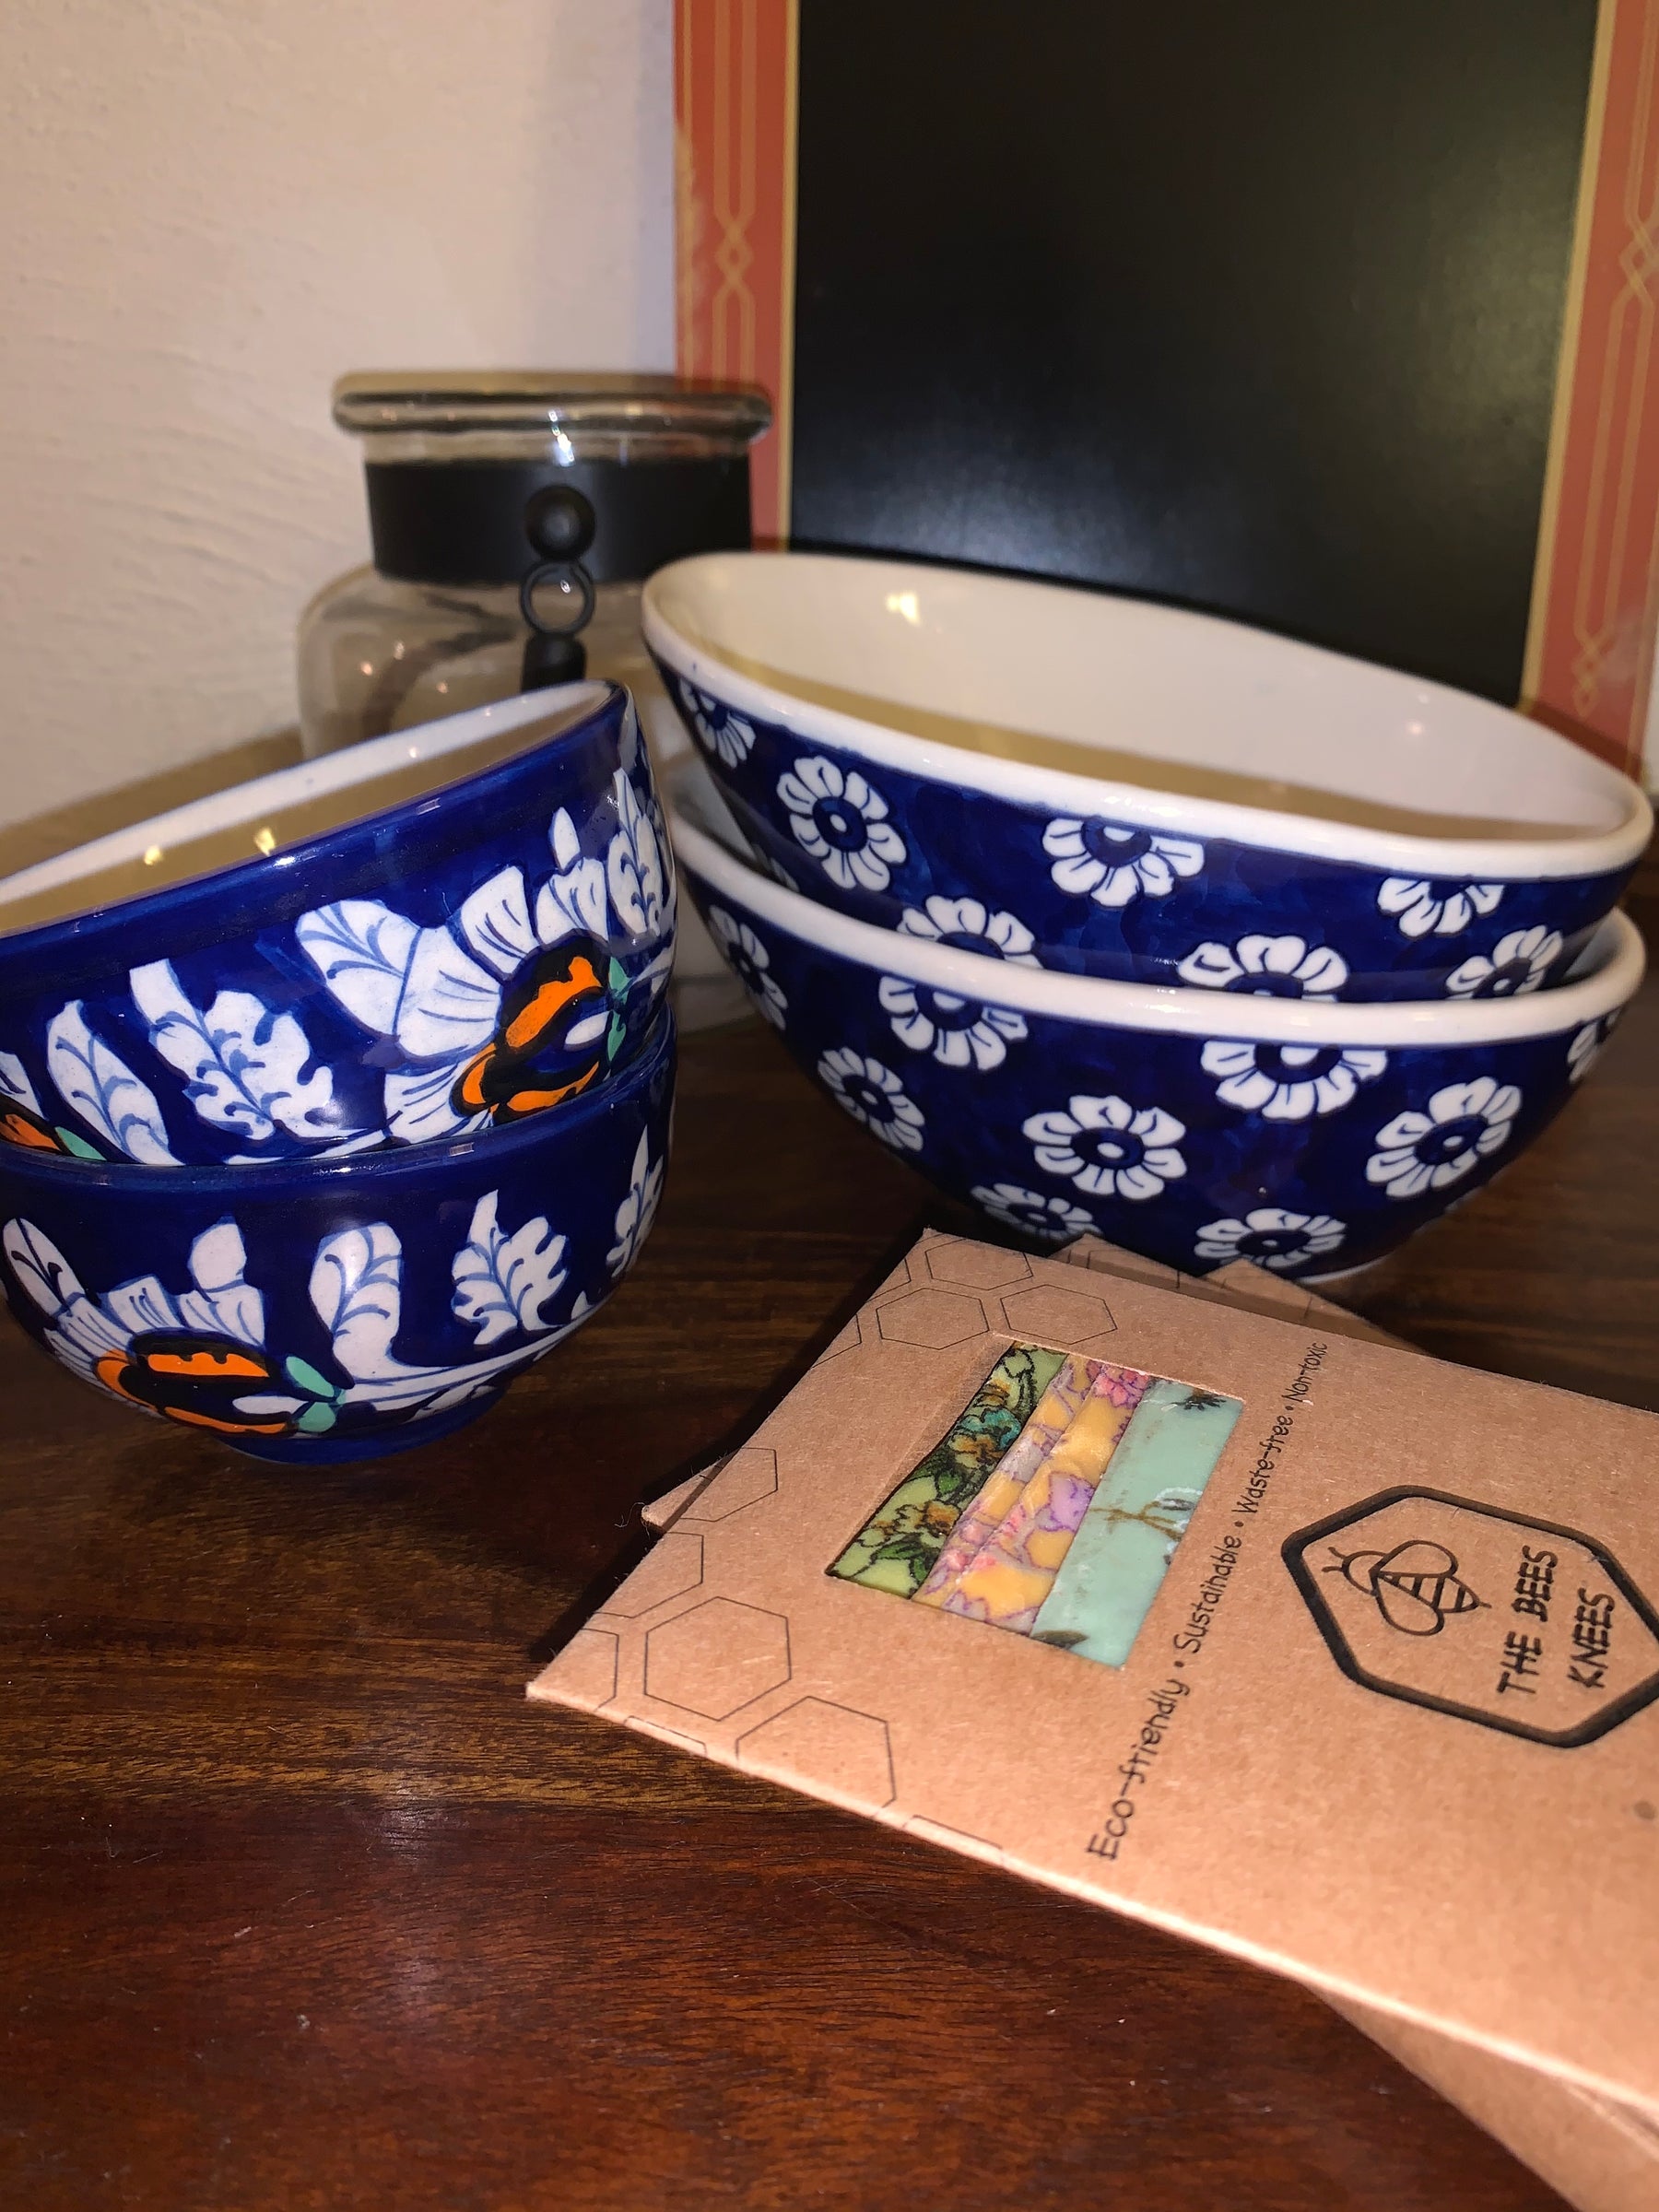 An image of hand painted ceramic bowls and wax wraps